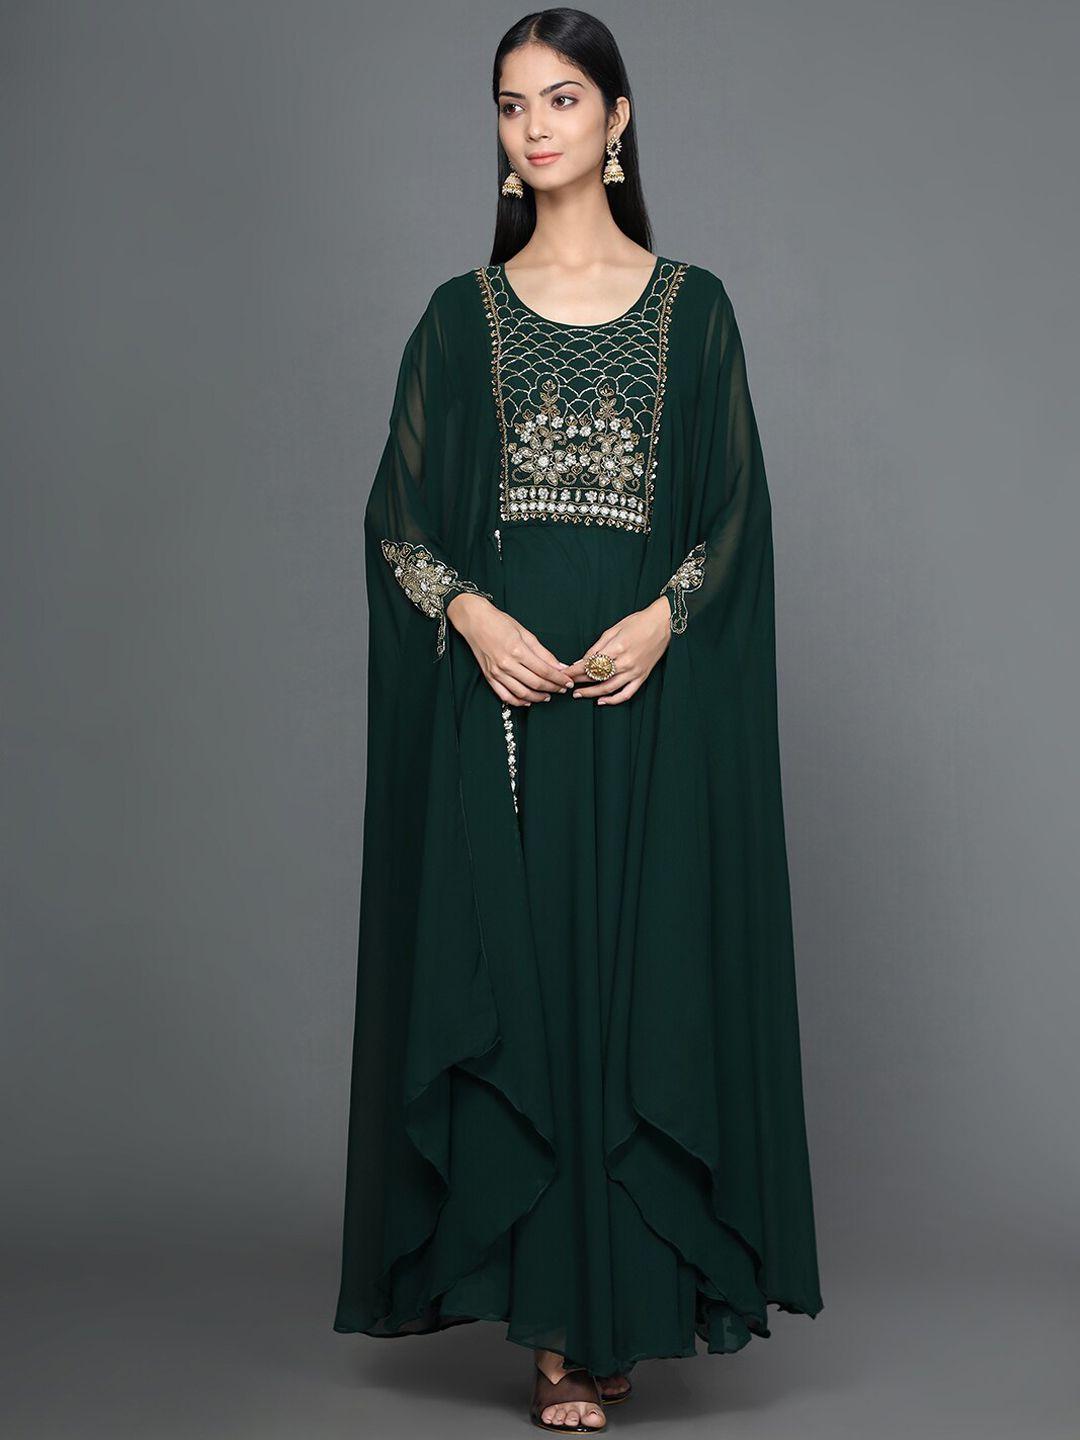 kalini-embroidered-beads-&-stones-georgette-fit-&-flared-maxi-ethnic-dress